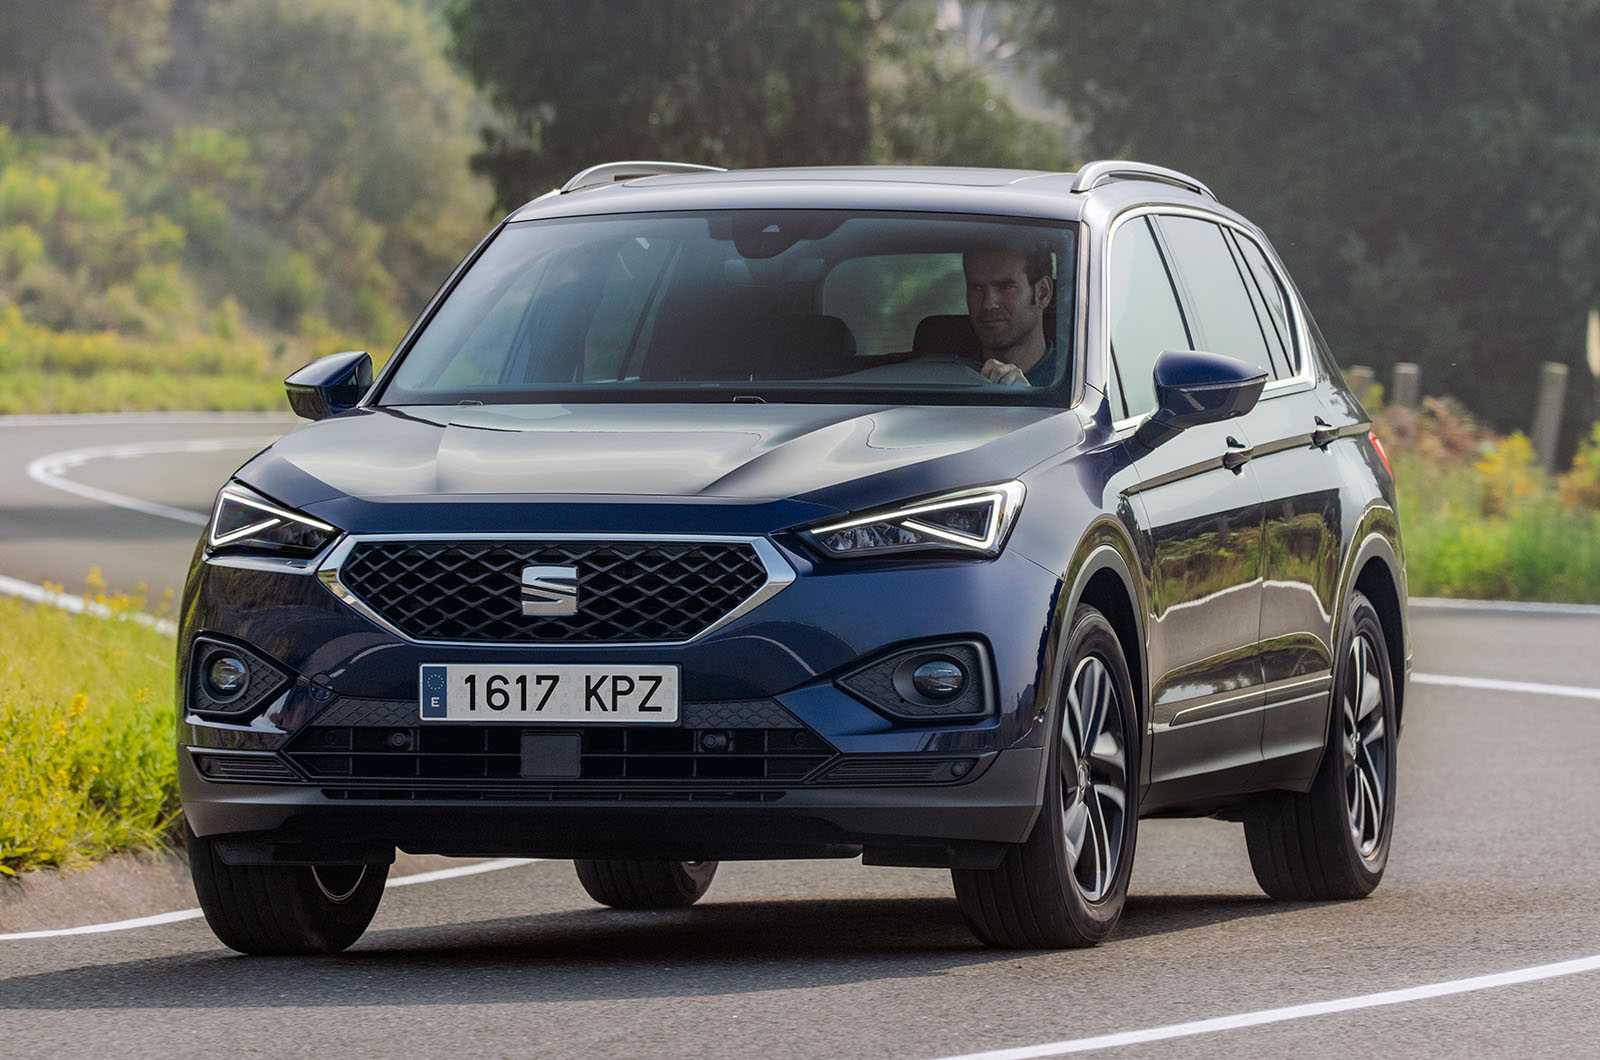 2019 Seat Tarraco review - price, specs and release date | What Car?